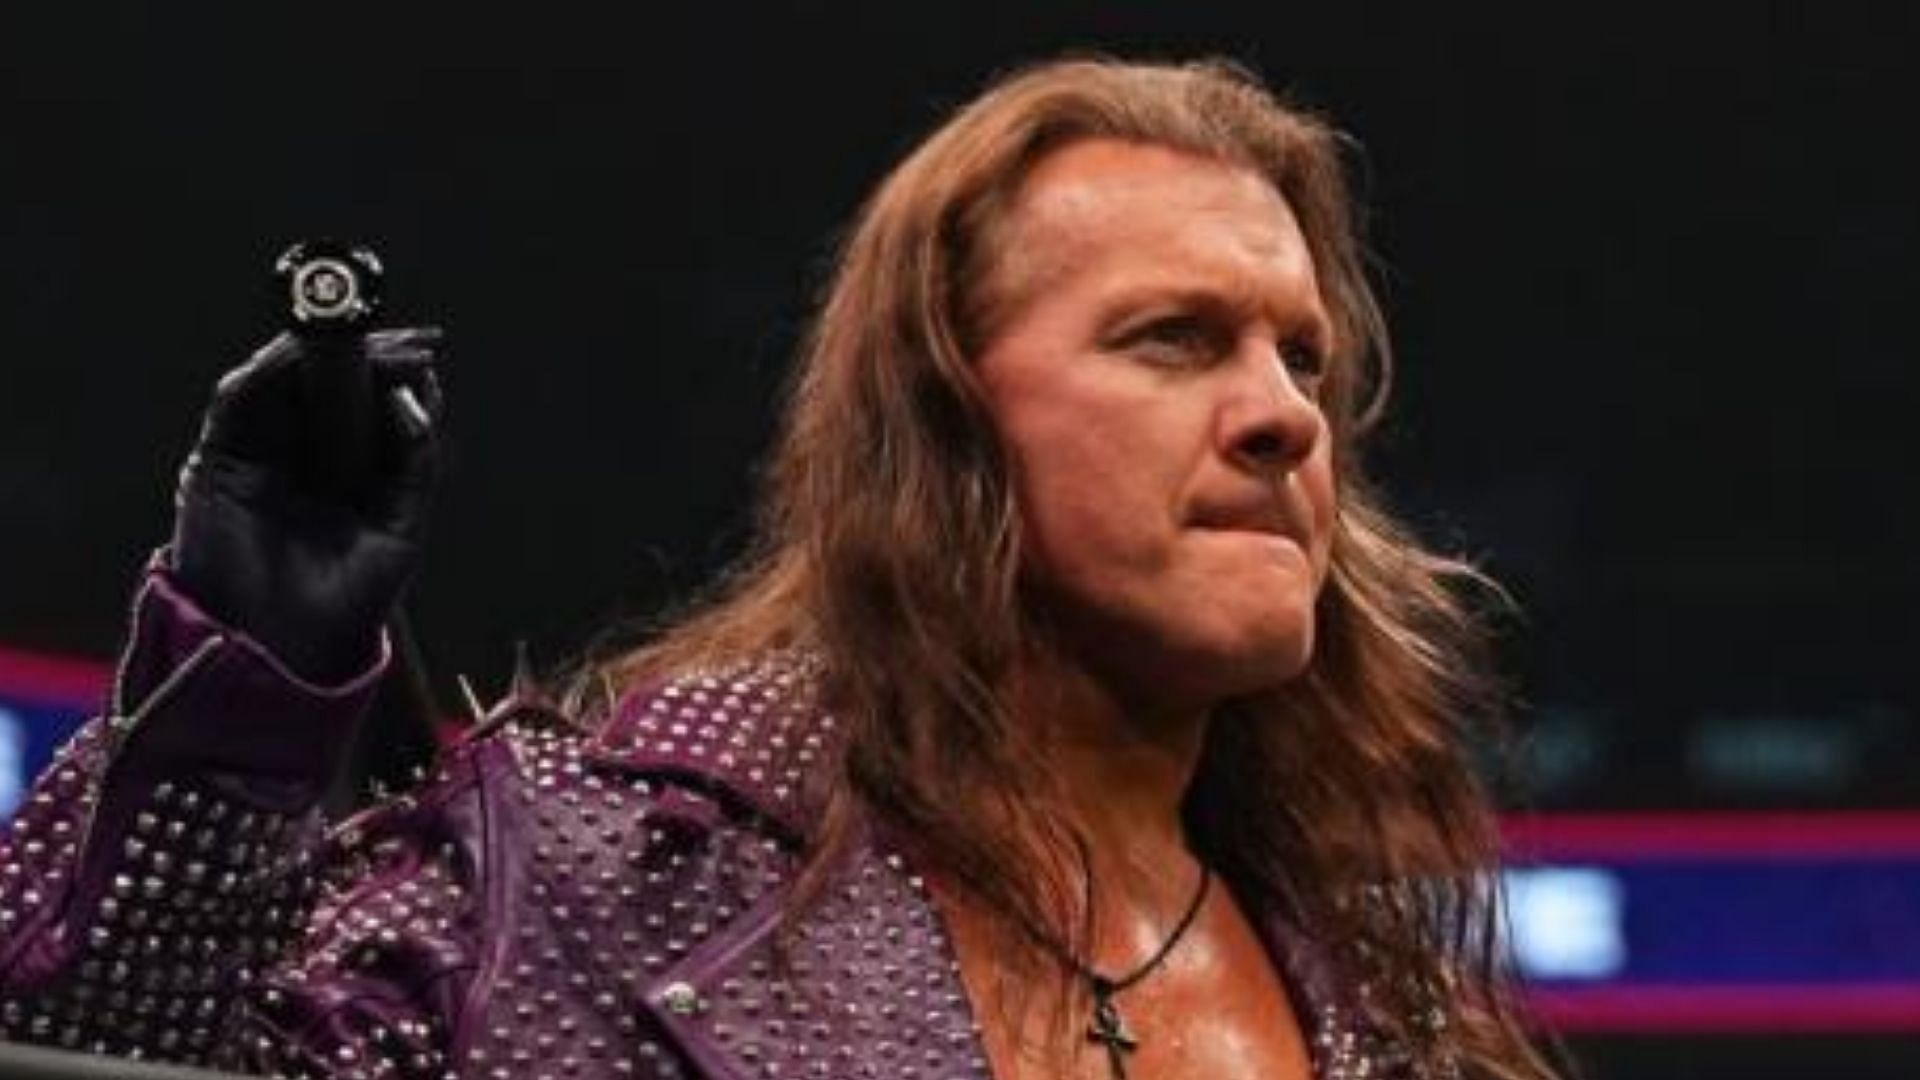 Chris Jericho was the first-ever AEW World Champion.